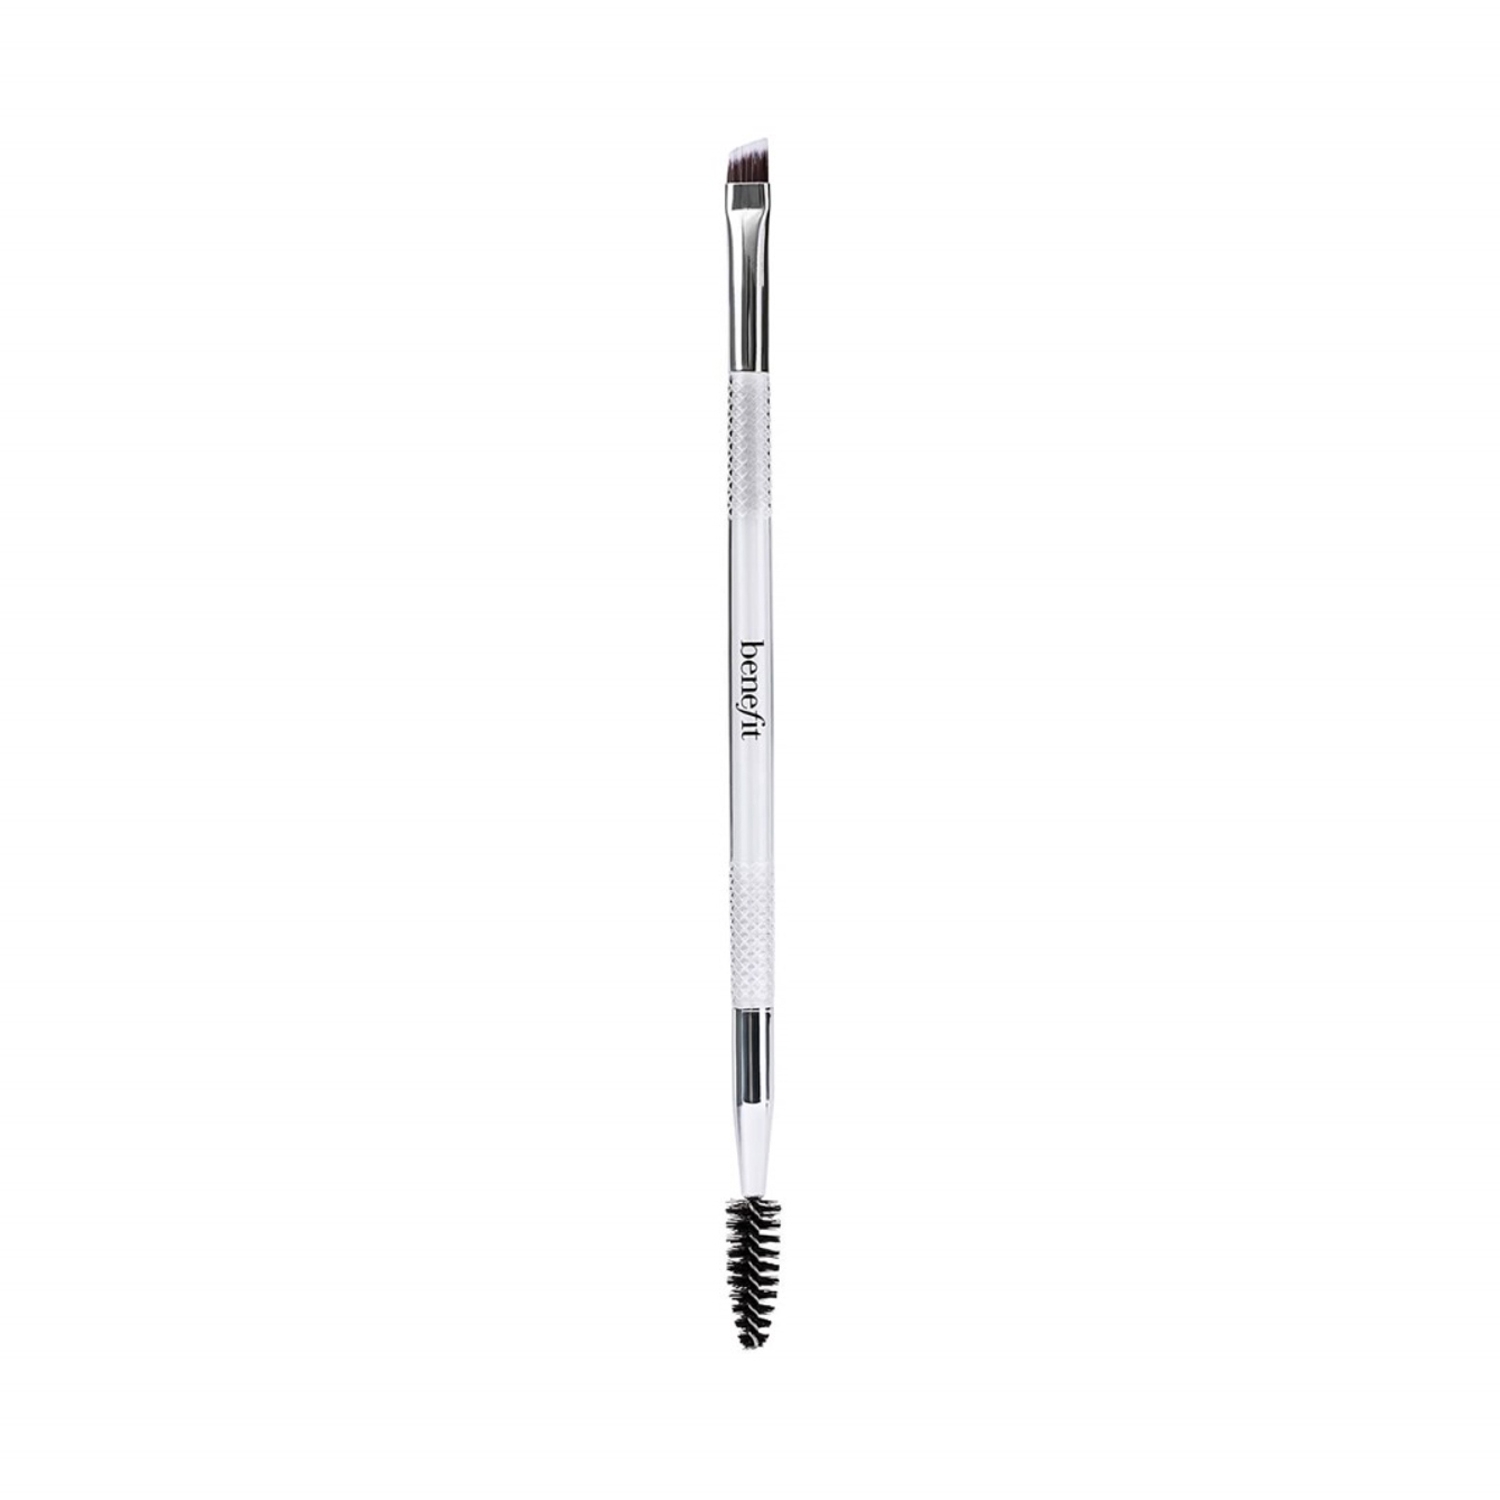 Benefit Cosmetics | Benefit Cosmetics Dual Ended Angled Eyebrow Brush